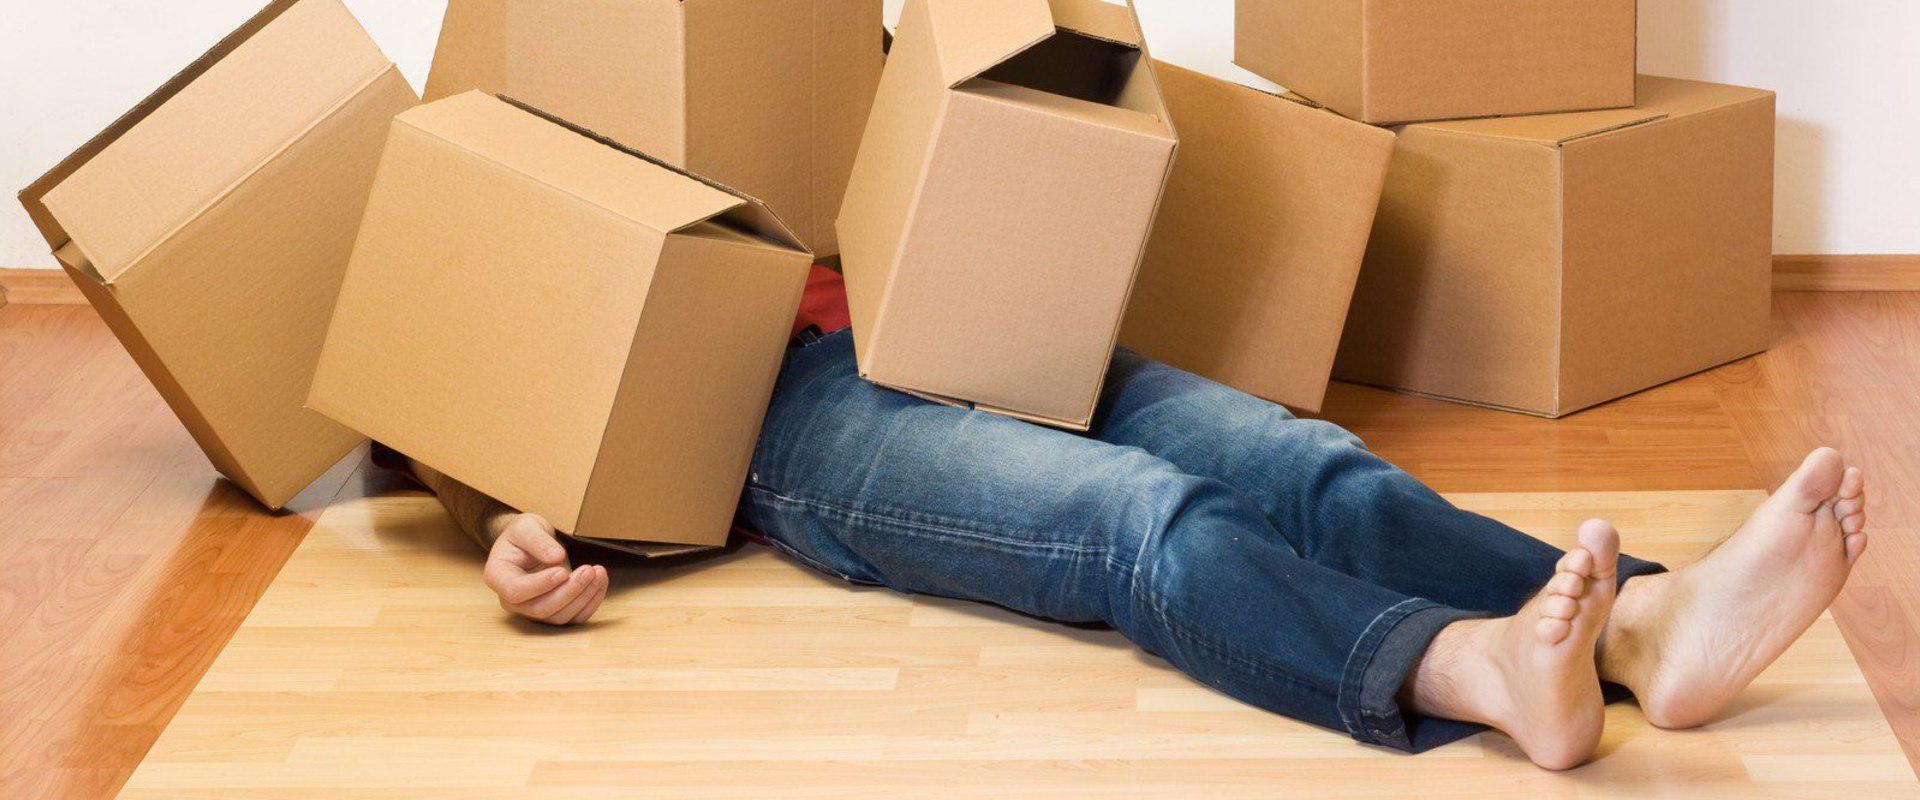 The Best Time to Hire Movers for a Cost-Effective Move